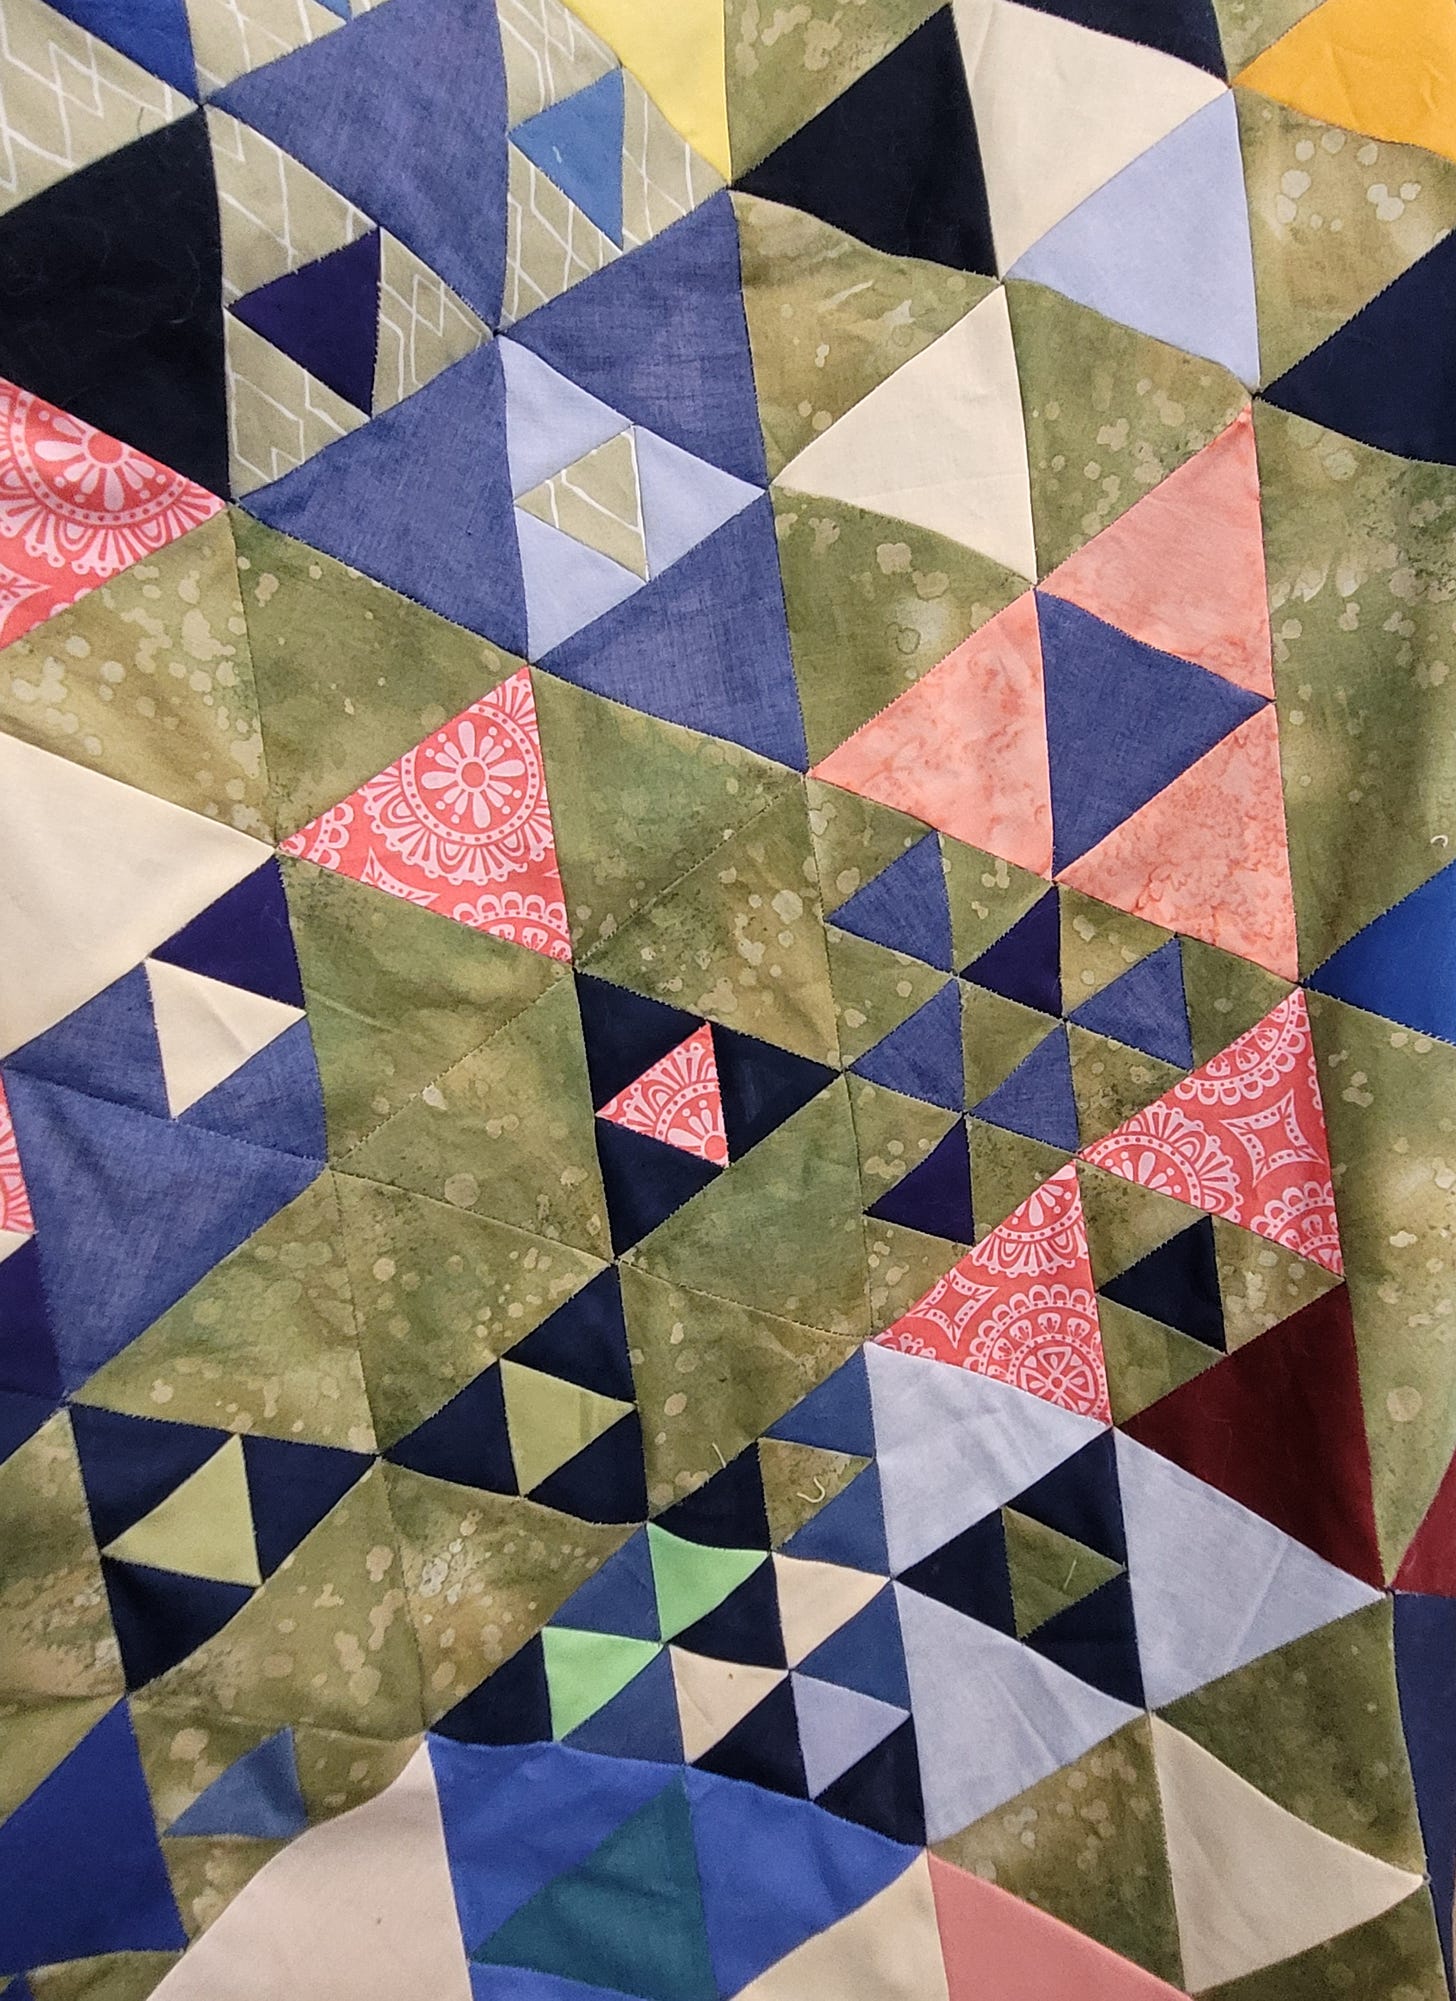 EPP Triangle Quilt in blues, olives, and melon colors